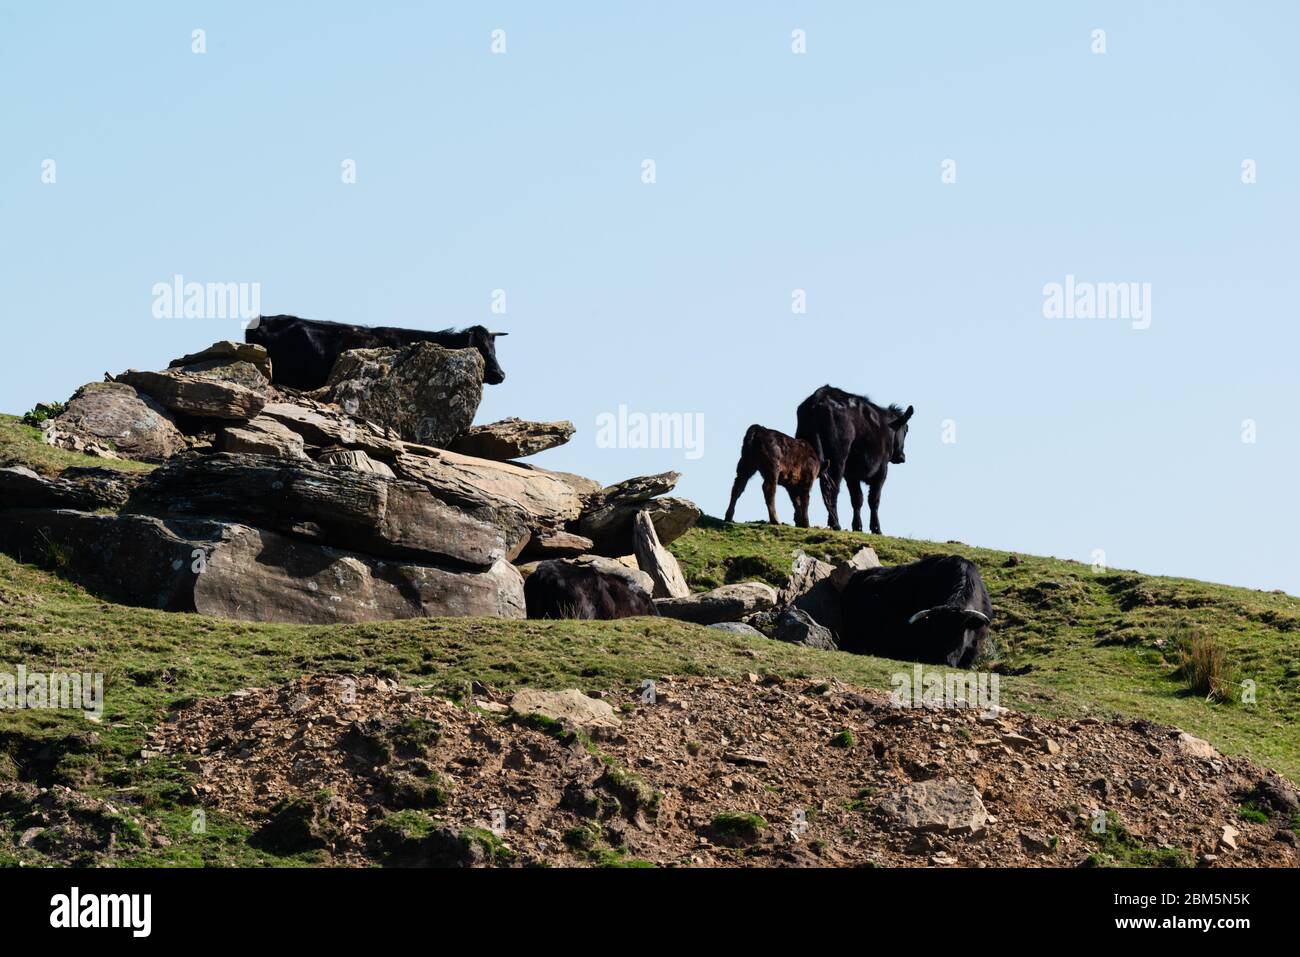 Cows and a calf on a rocky mound Stock Photo